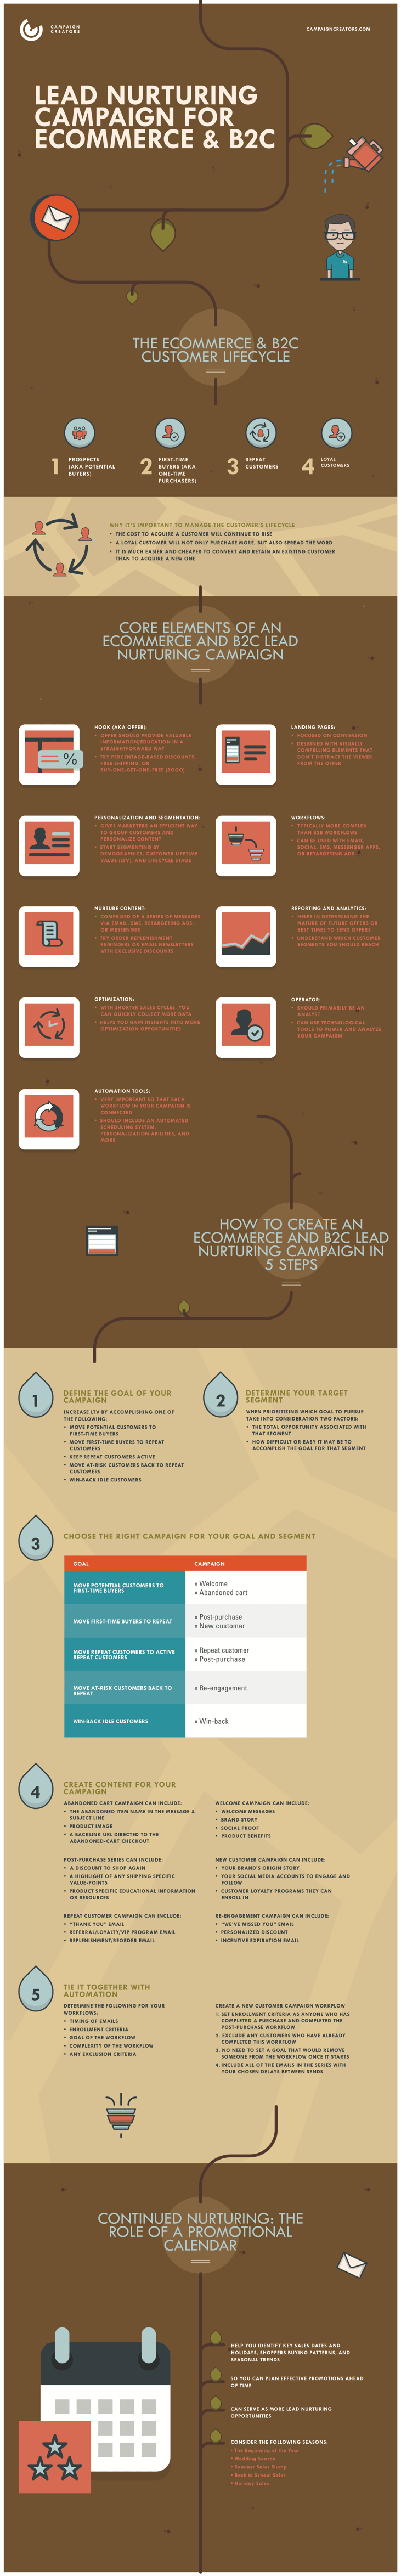 CC - Lead Nurturing Campaign for ECommerce and B2C - Lesson 8 Infographic